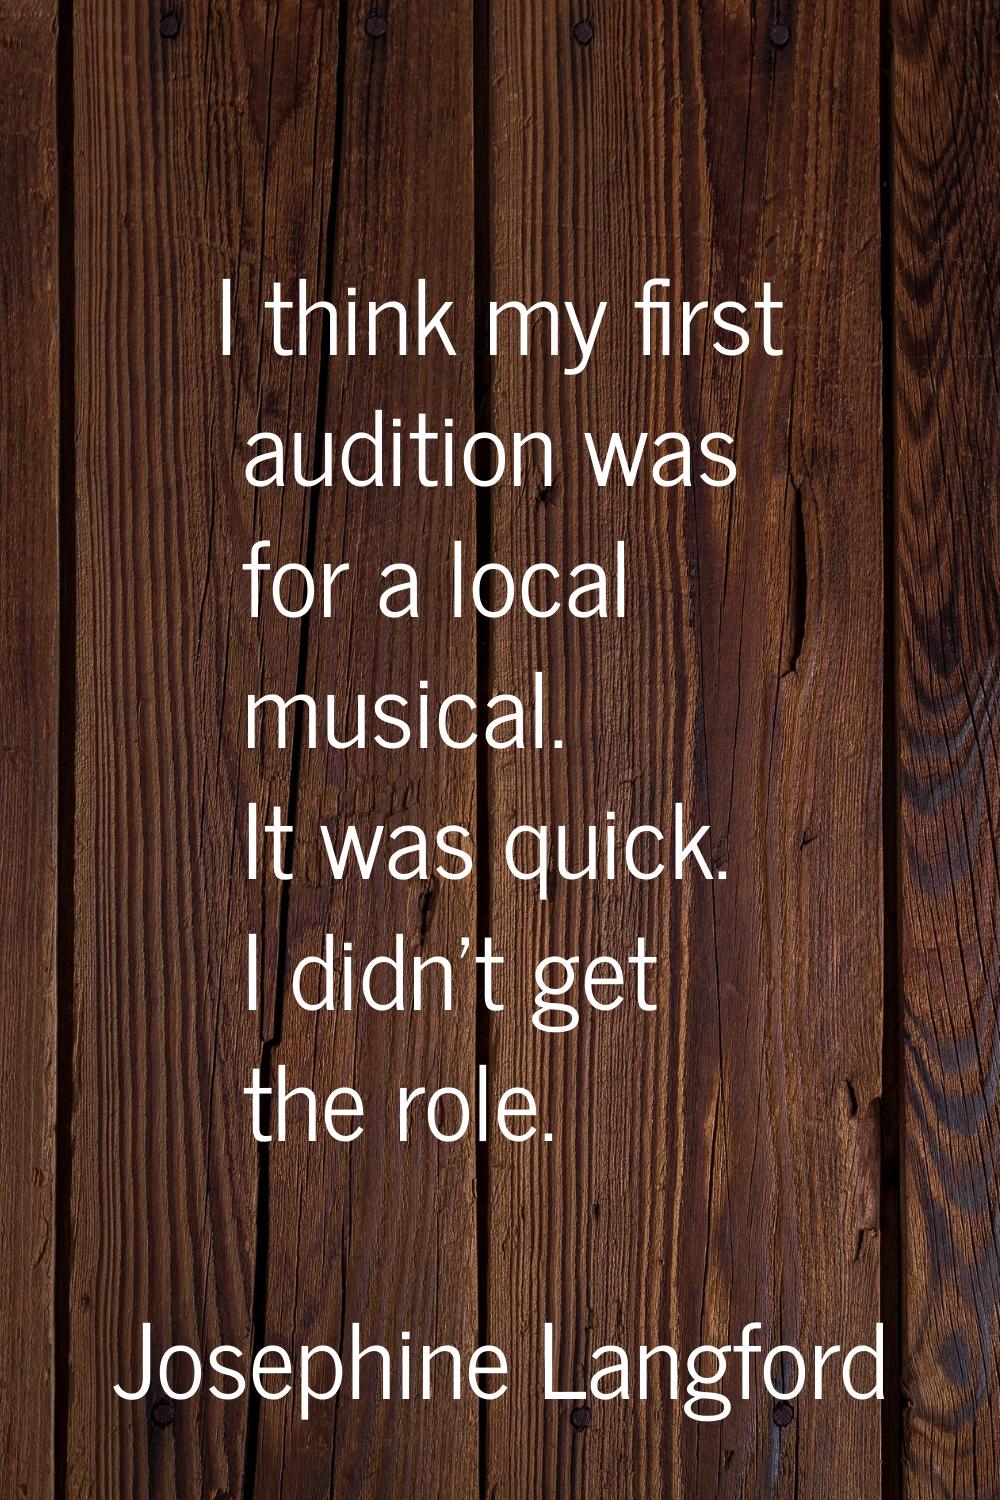 I think my first audition was for a local musical. It was quick. I didn't get the role.